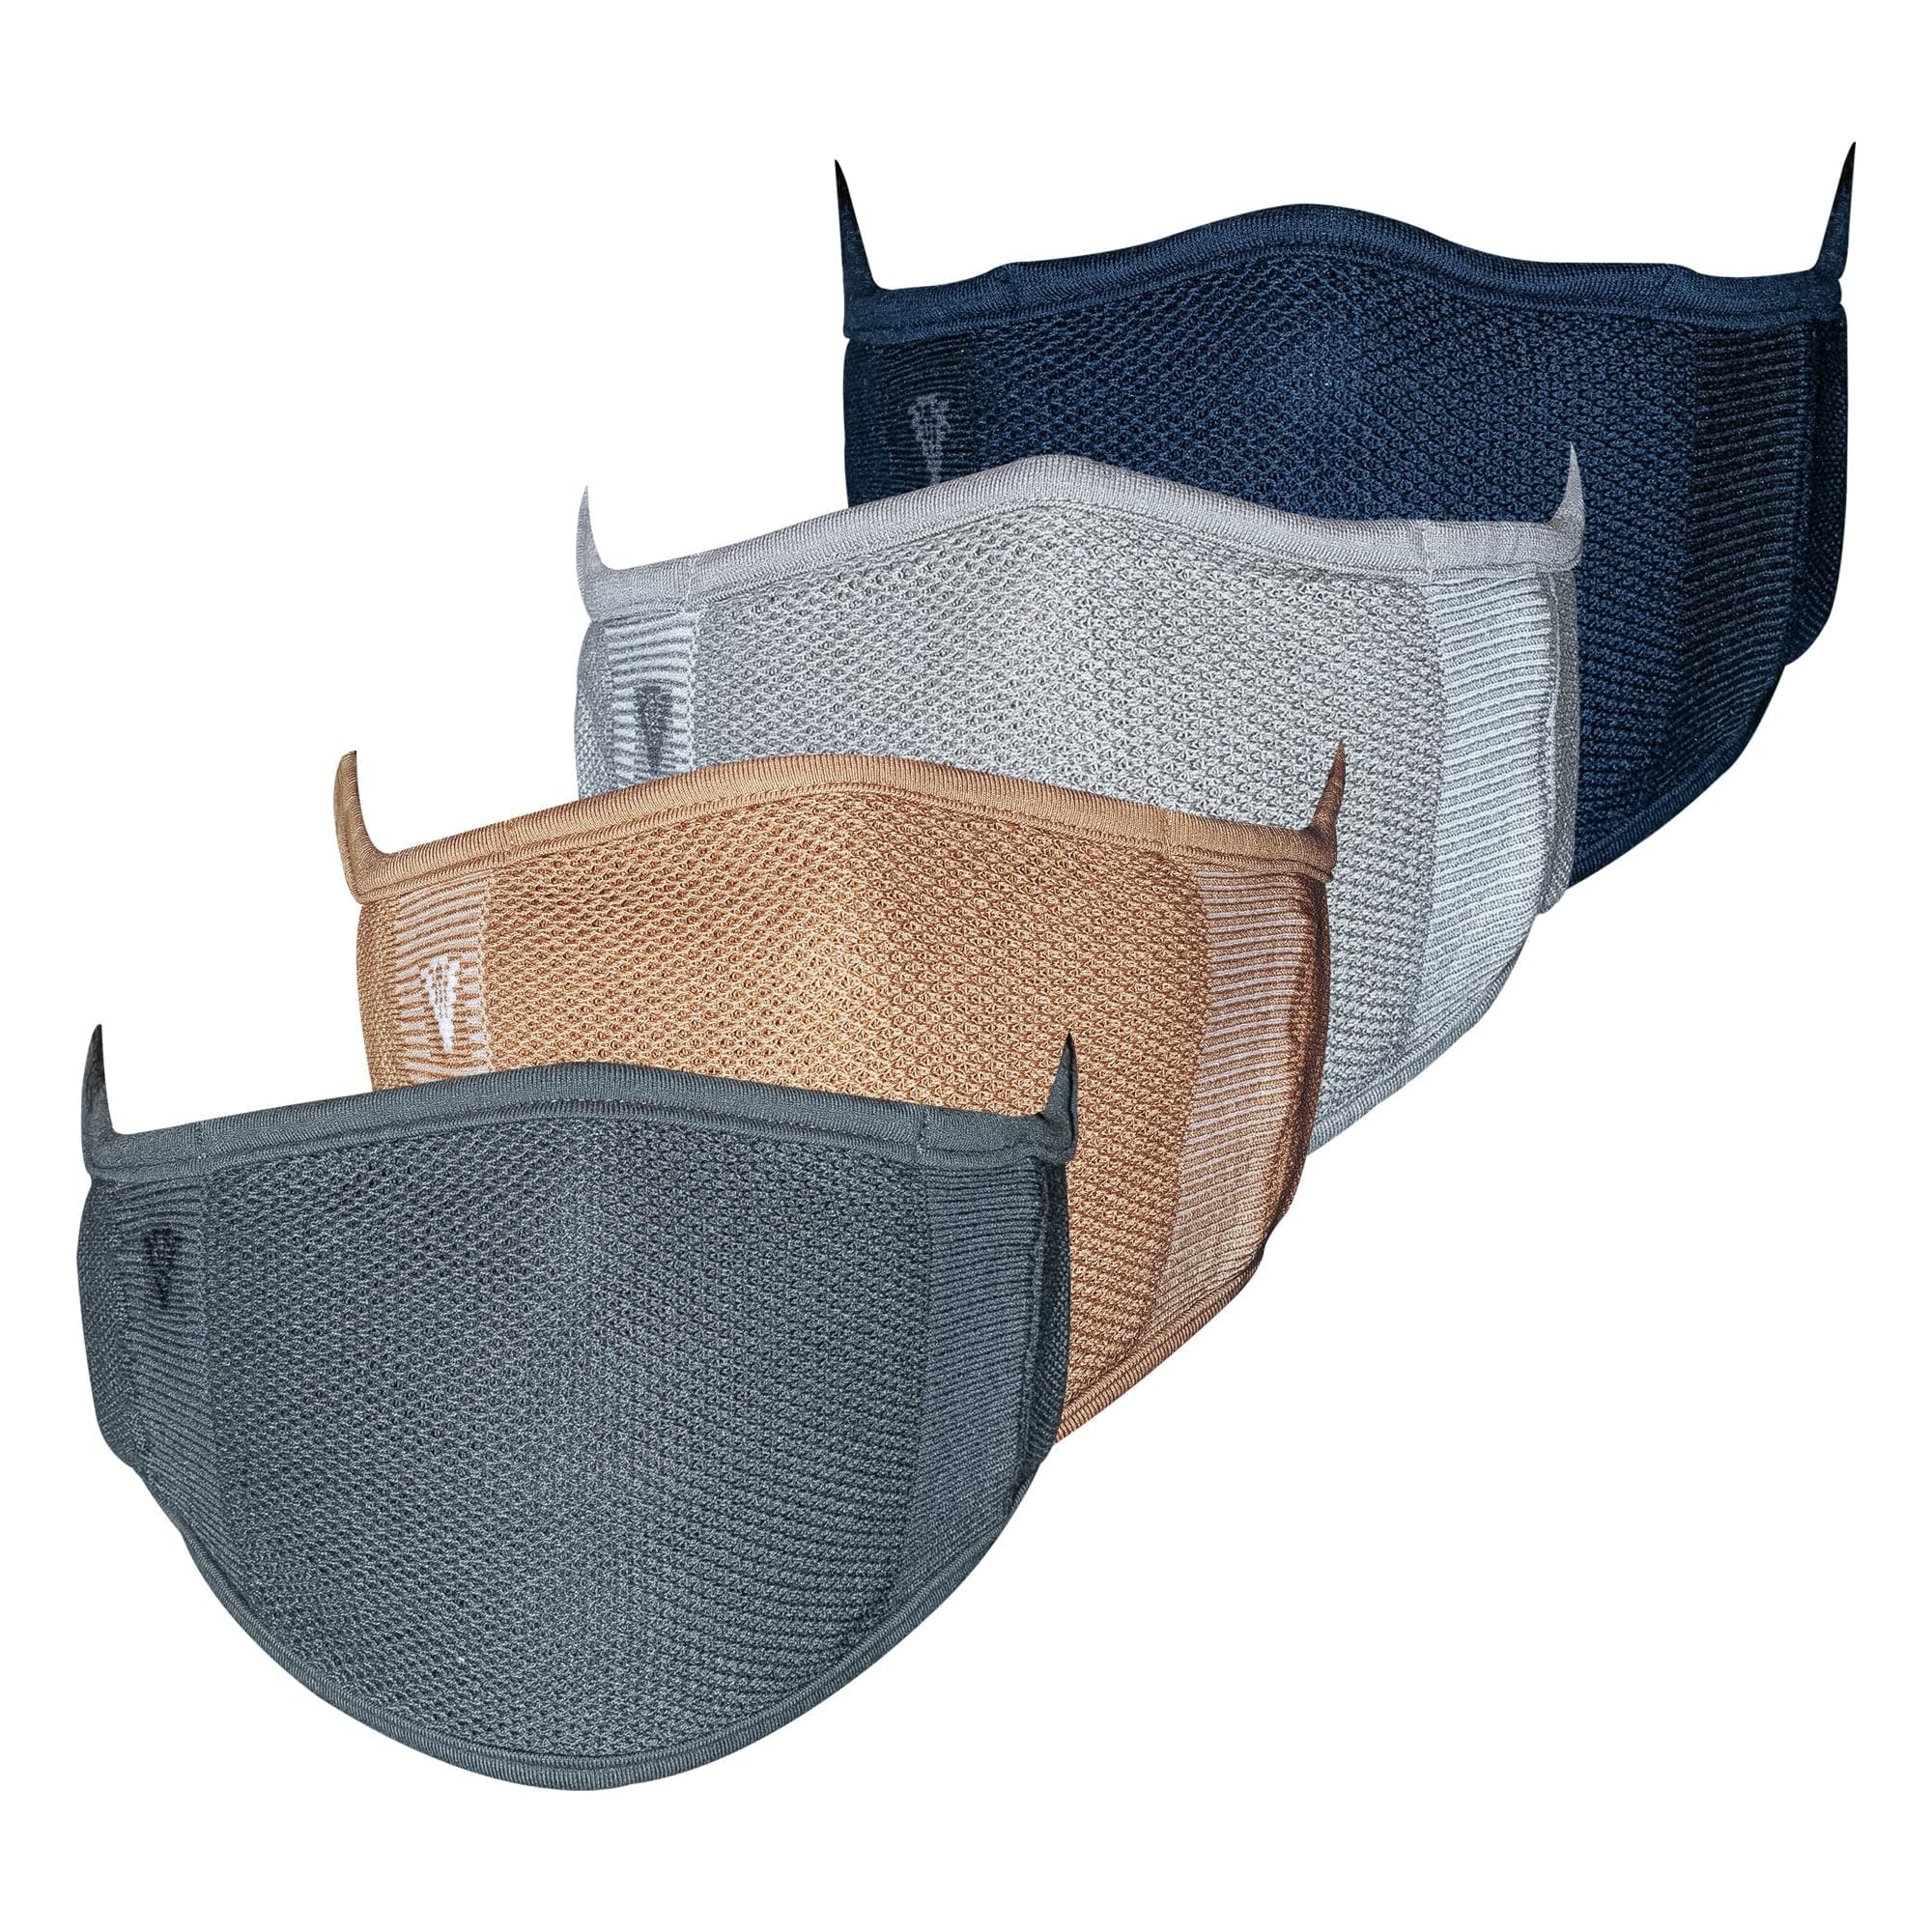 4-Layer Anti-Bacterial Protection Mask for Adults (Unisex) - Pack of 4